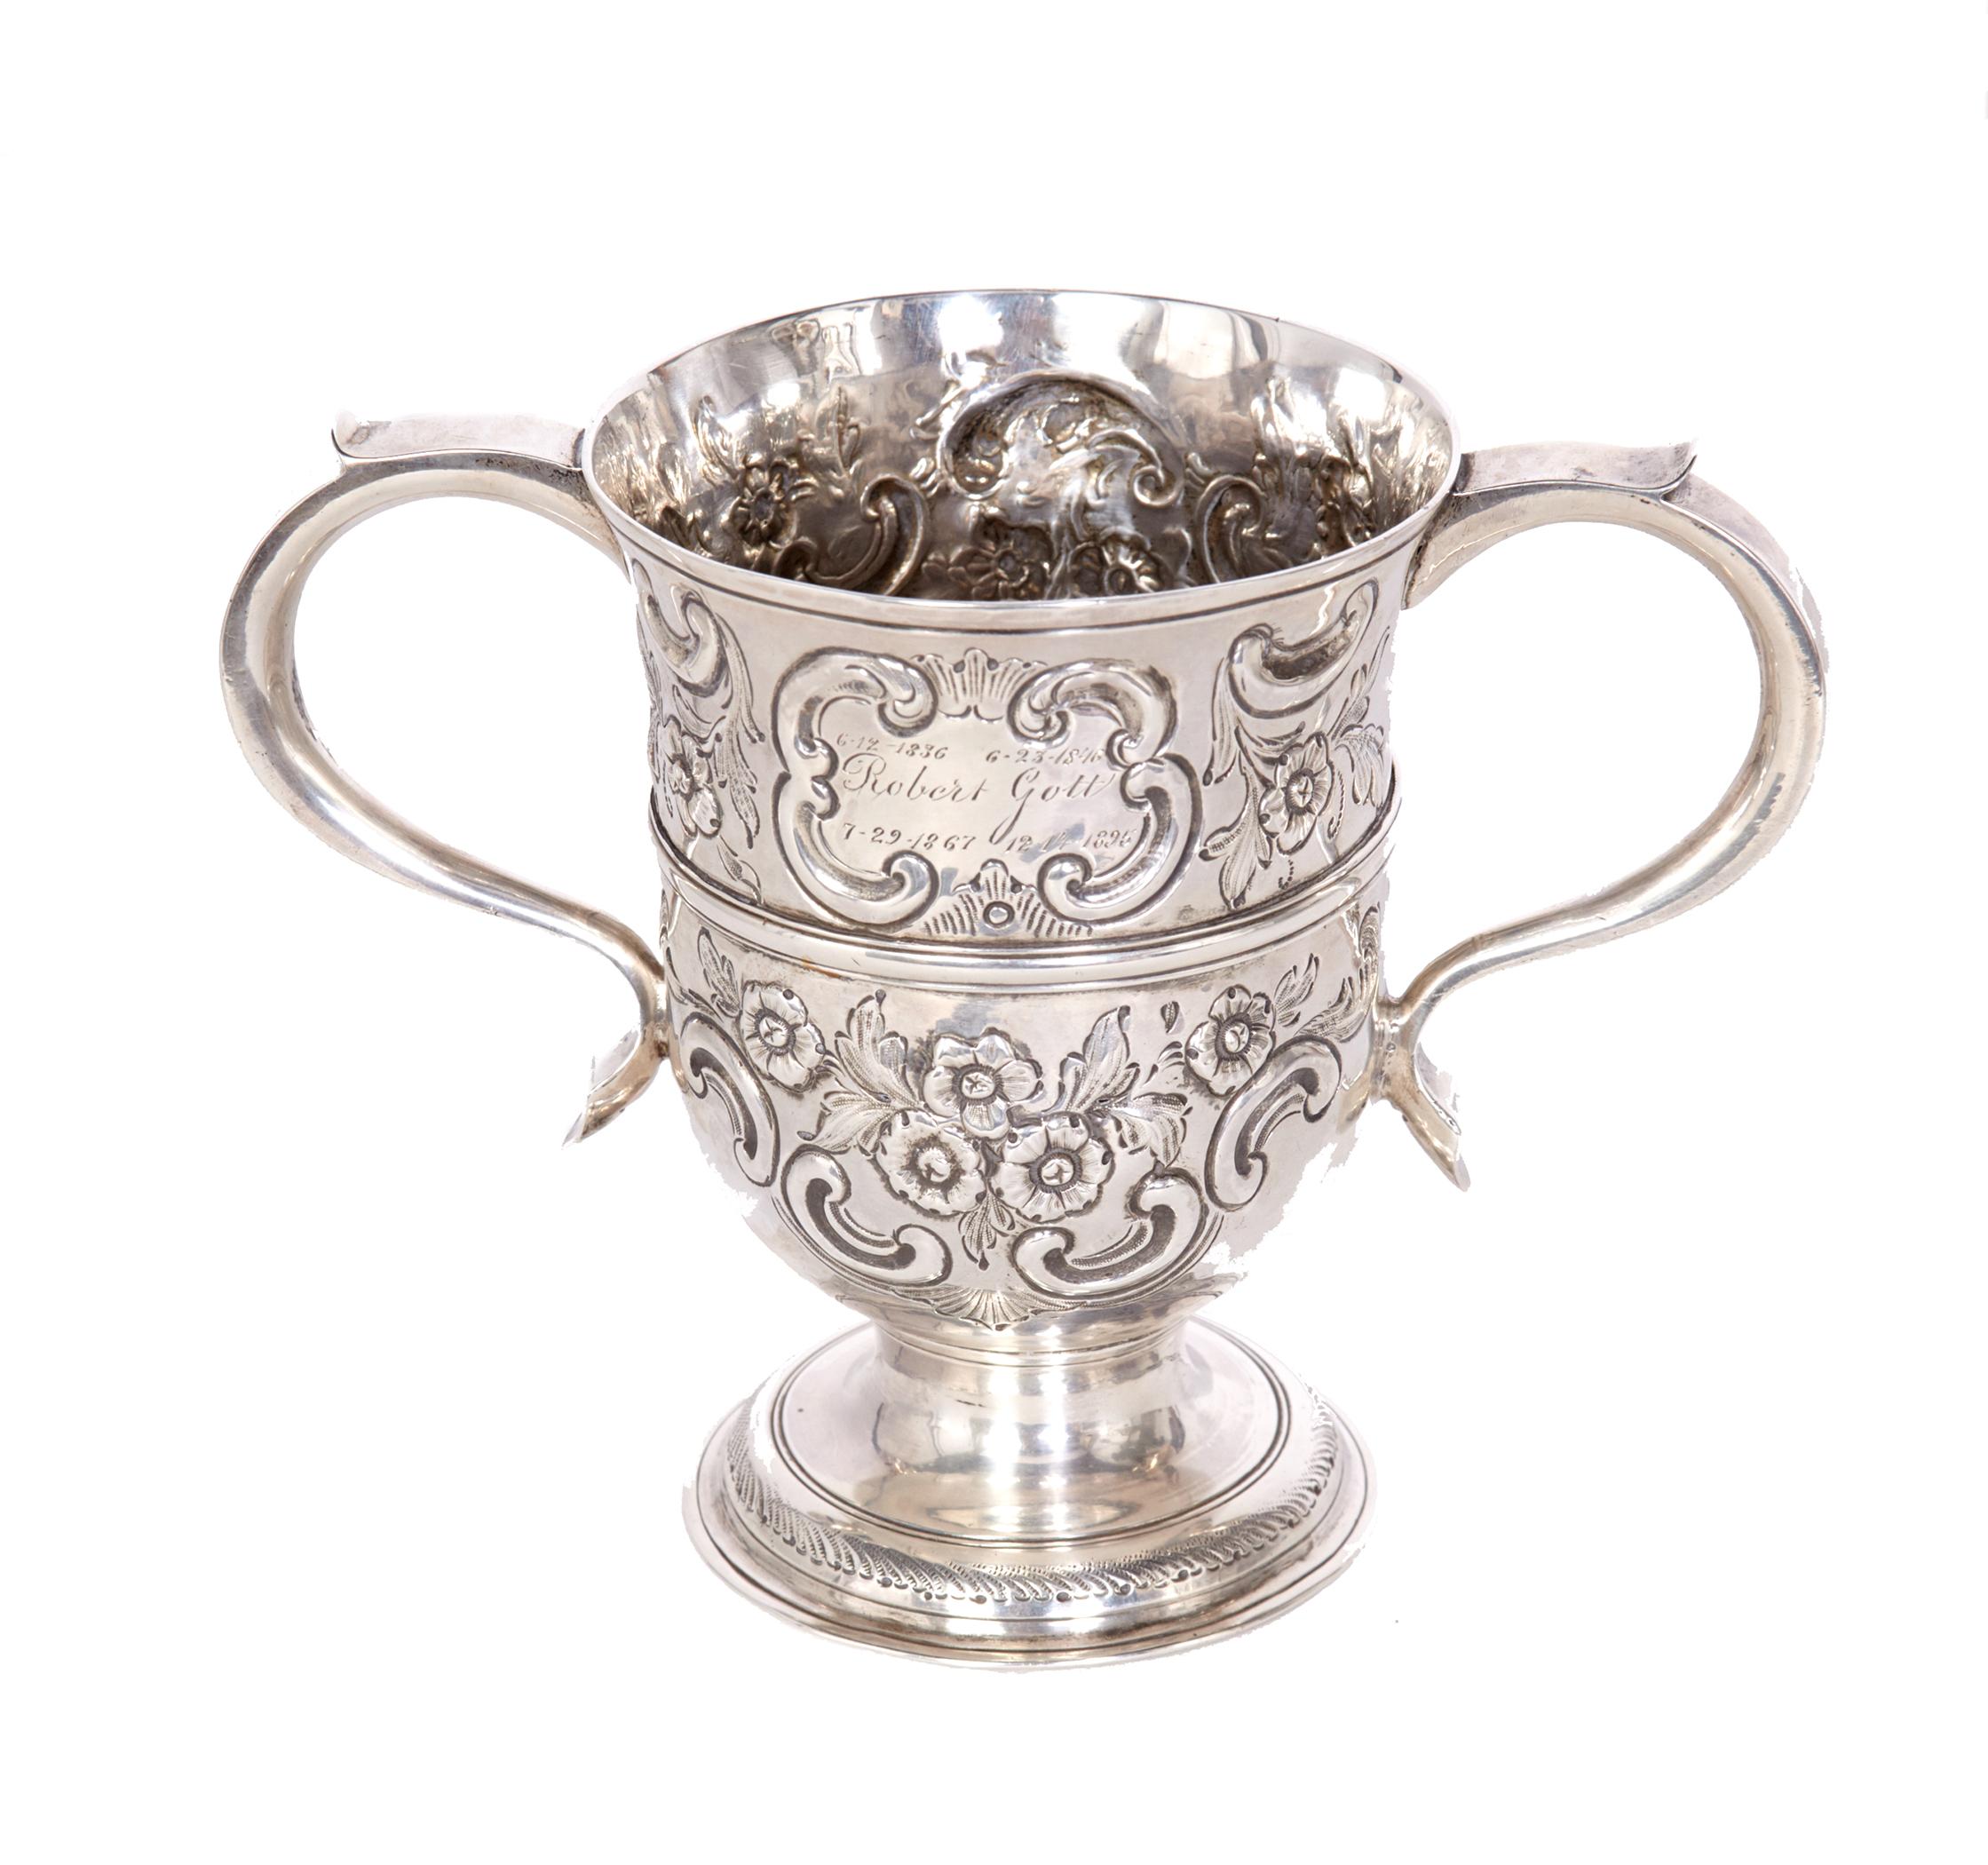 Sterling silver 2-handled loving cup made in London in 1762 by Thomas Whipham and Charles Wright. Fully hallmarked on the bottom this cup is in excellent condition. Beautifully decorated with flowers and scrolls it is 5 1/8